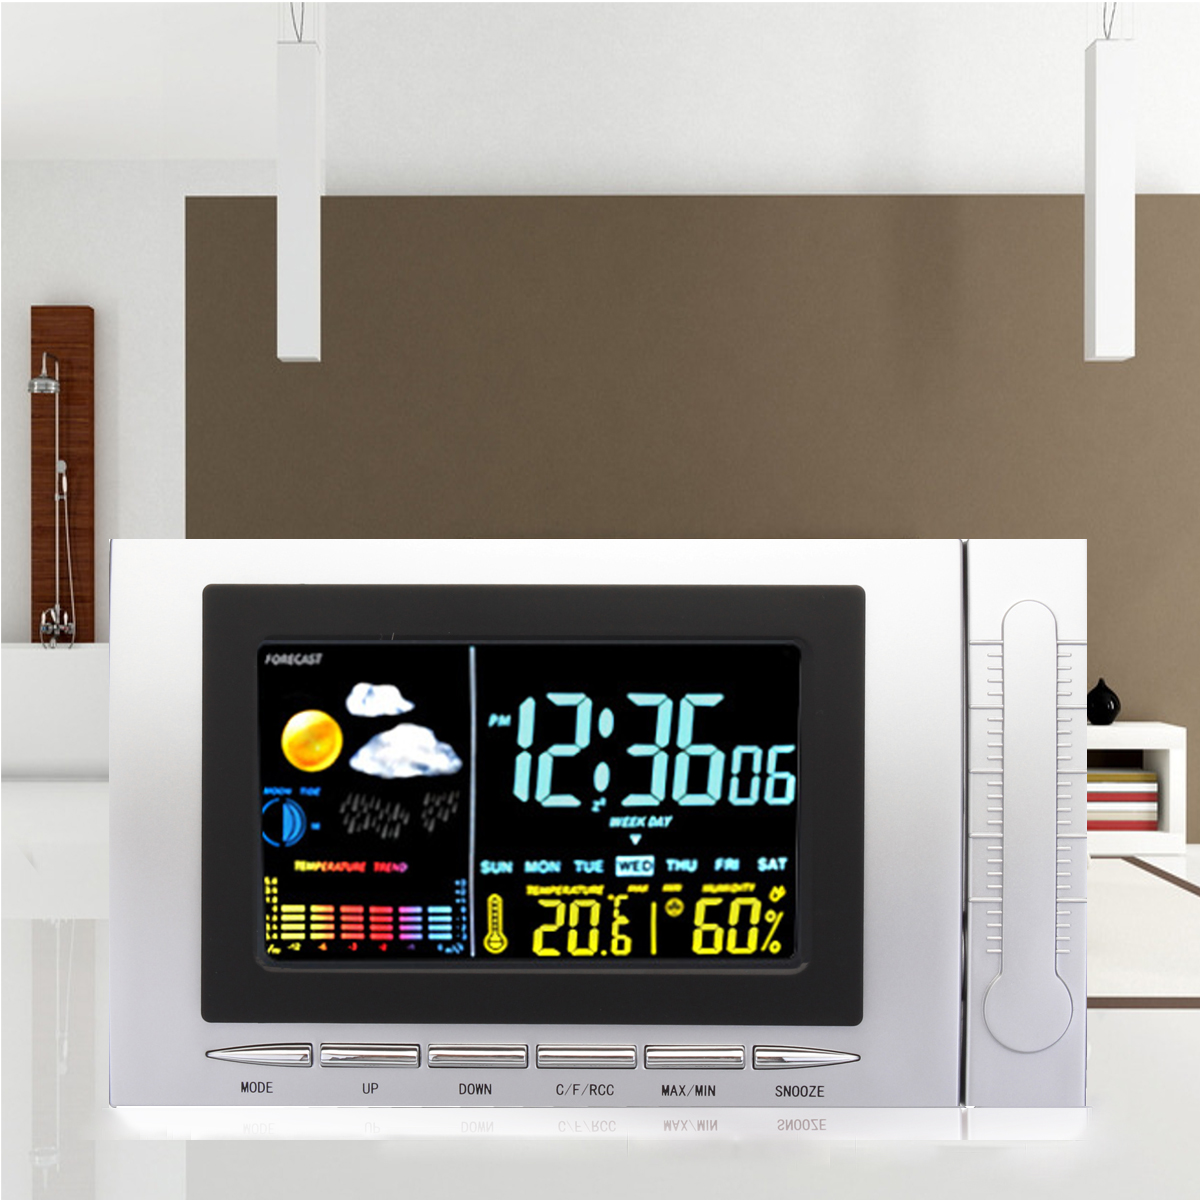 Classic-Weather-Station-Alarm-Clock-Color-Screen-Backlight-Temperature-Display-1158053-1